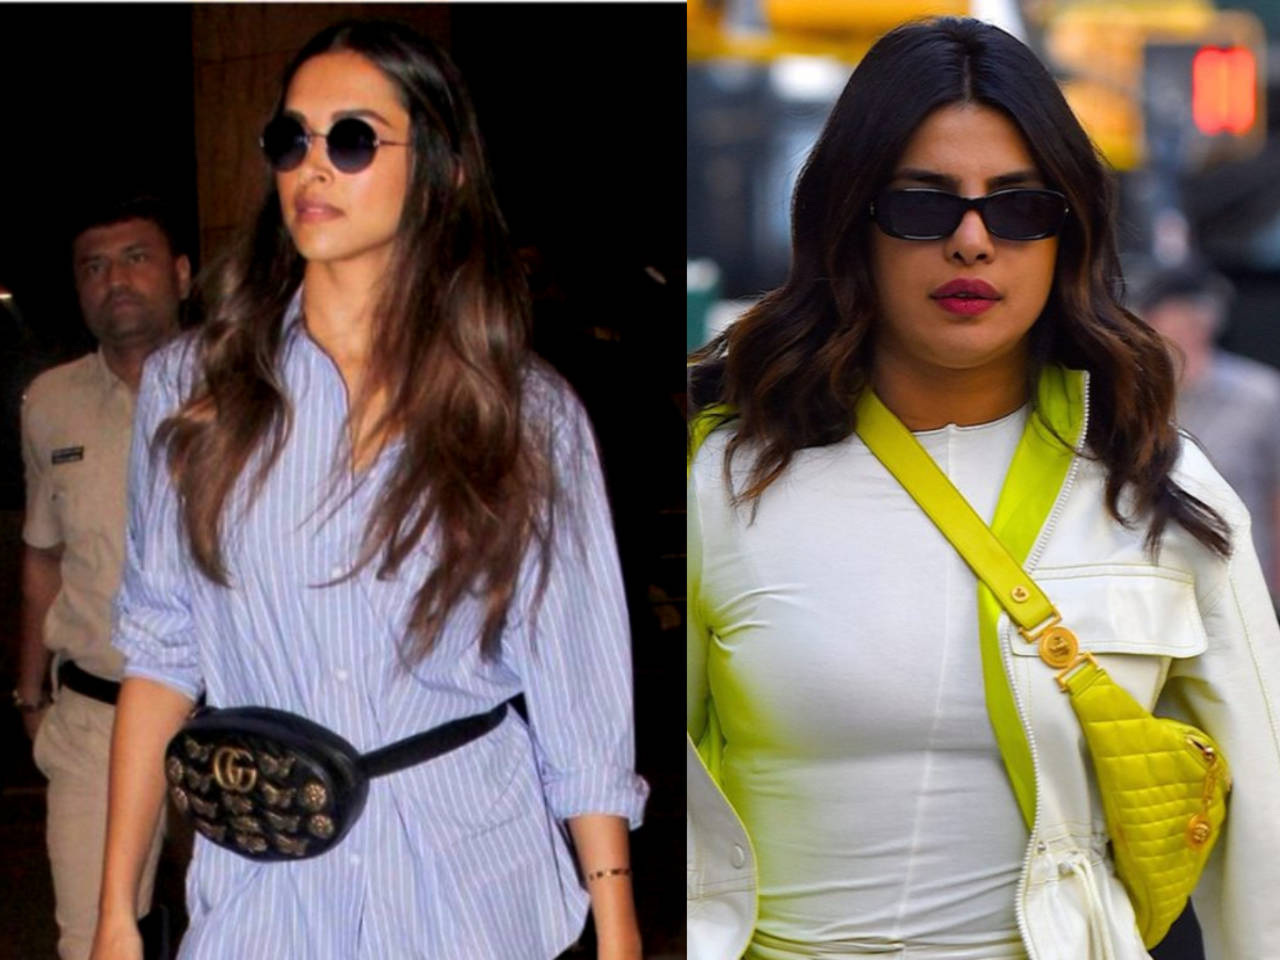 The Stylish Fanny Packs Are Now Making Their Way To Bollywood